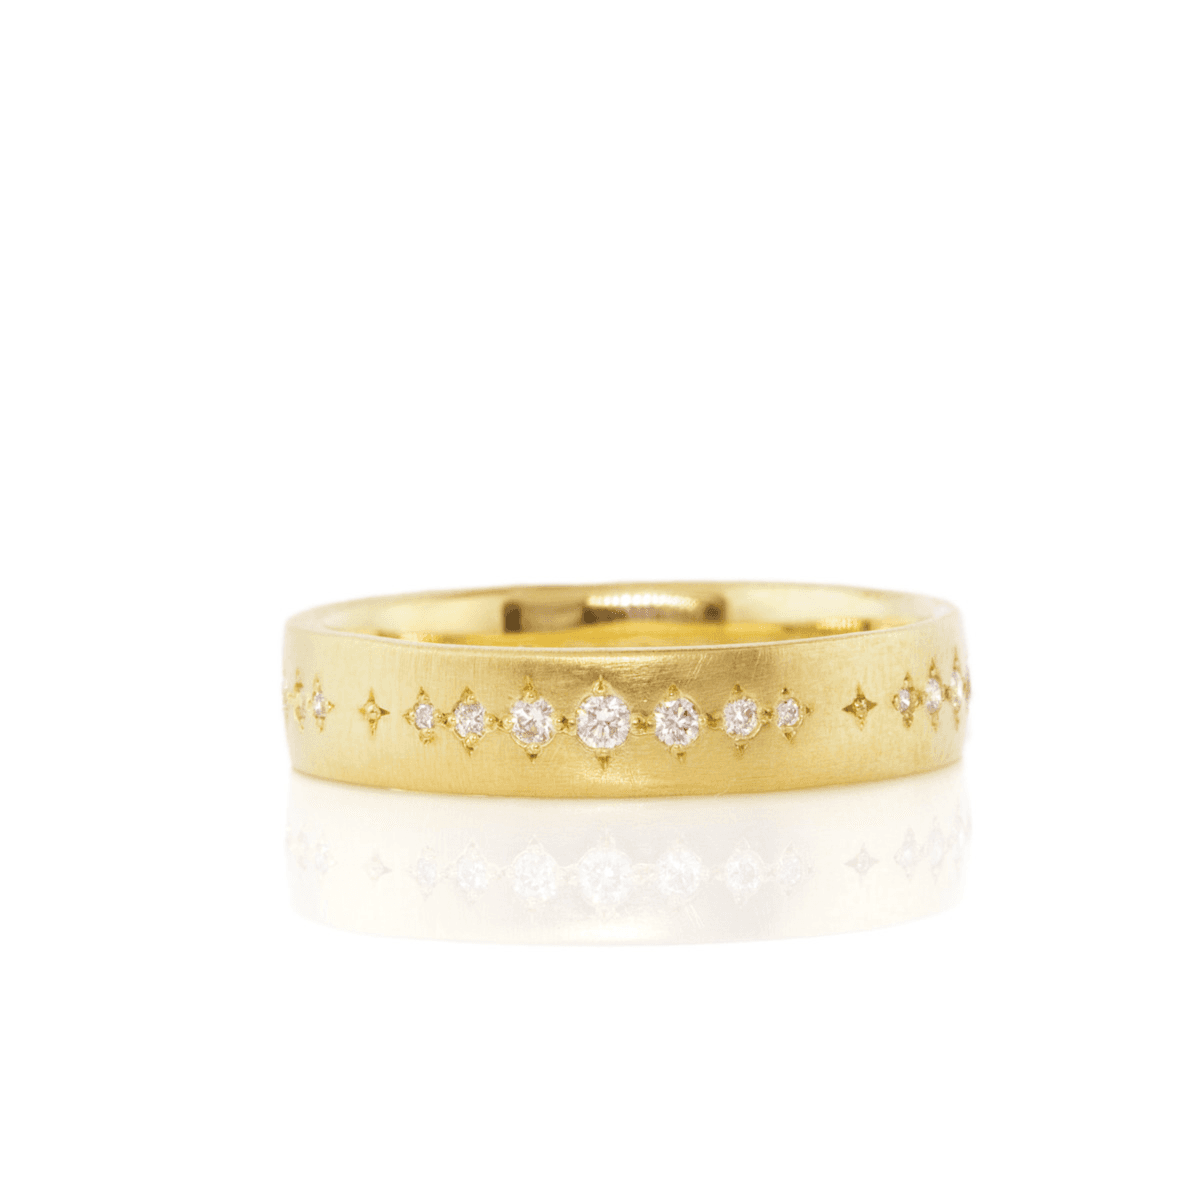 Daimonds in Gold Band - Adel Chefridi - Mansoor Jewelers